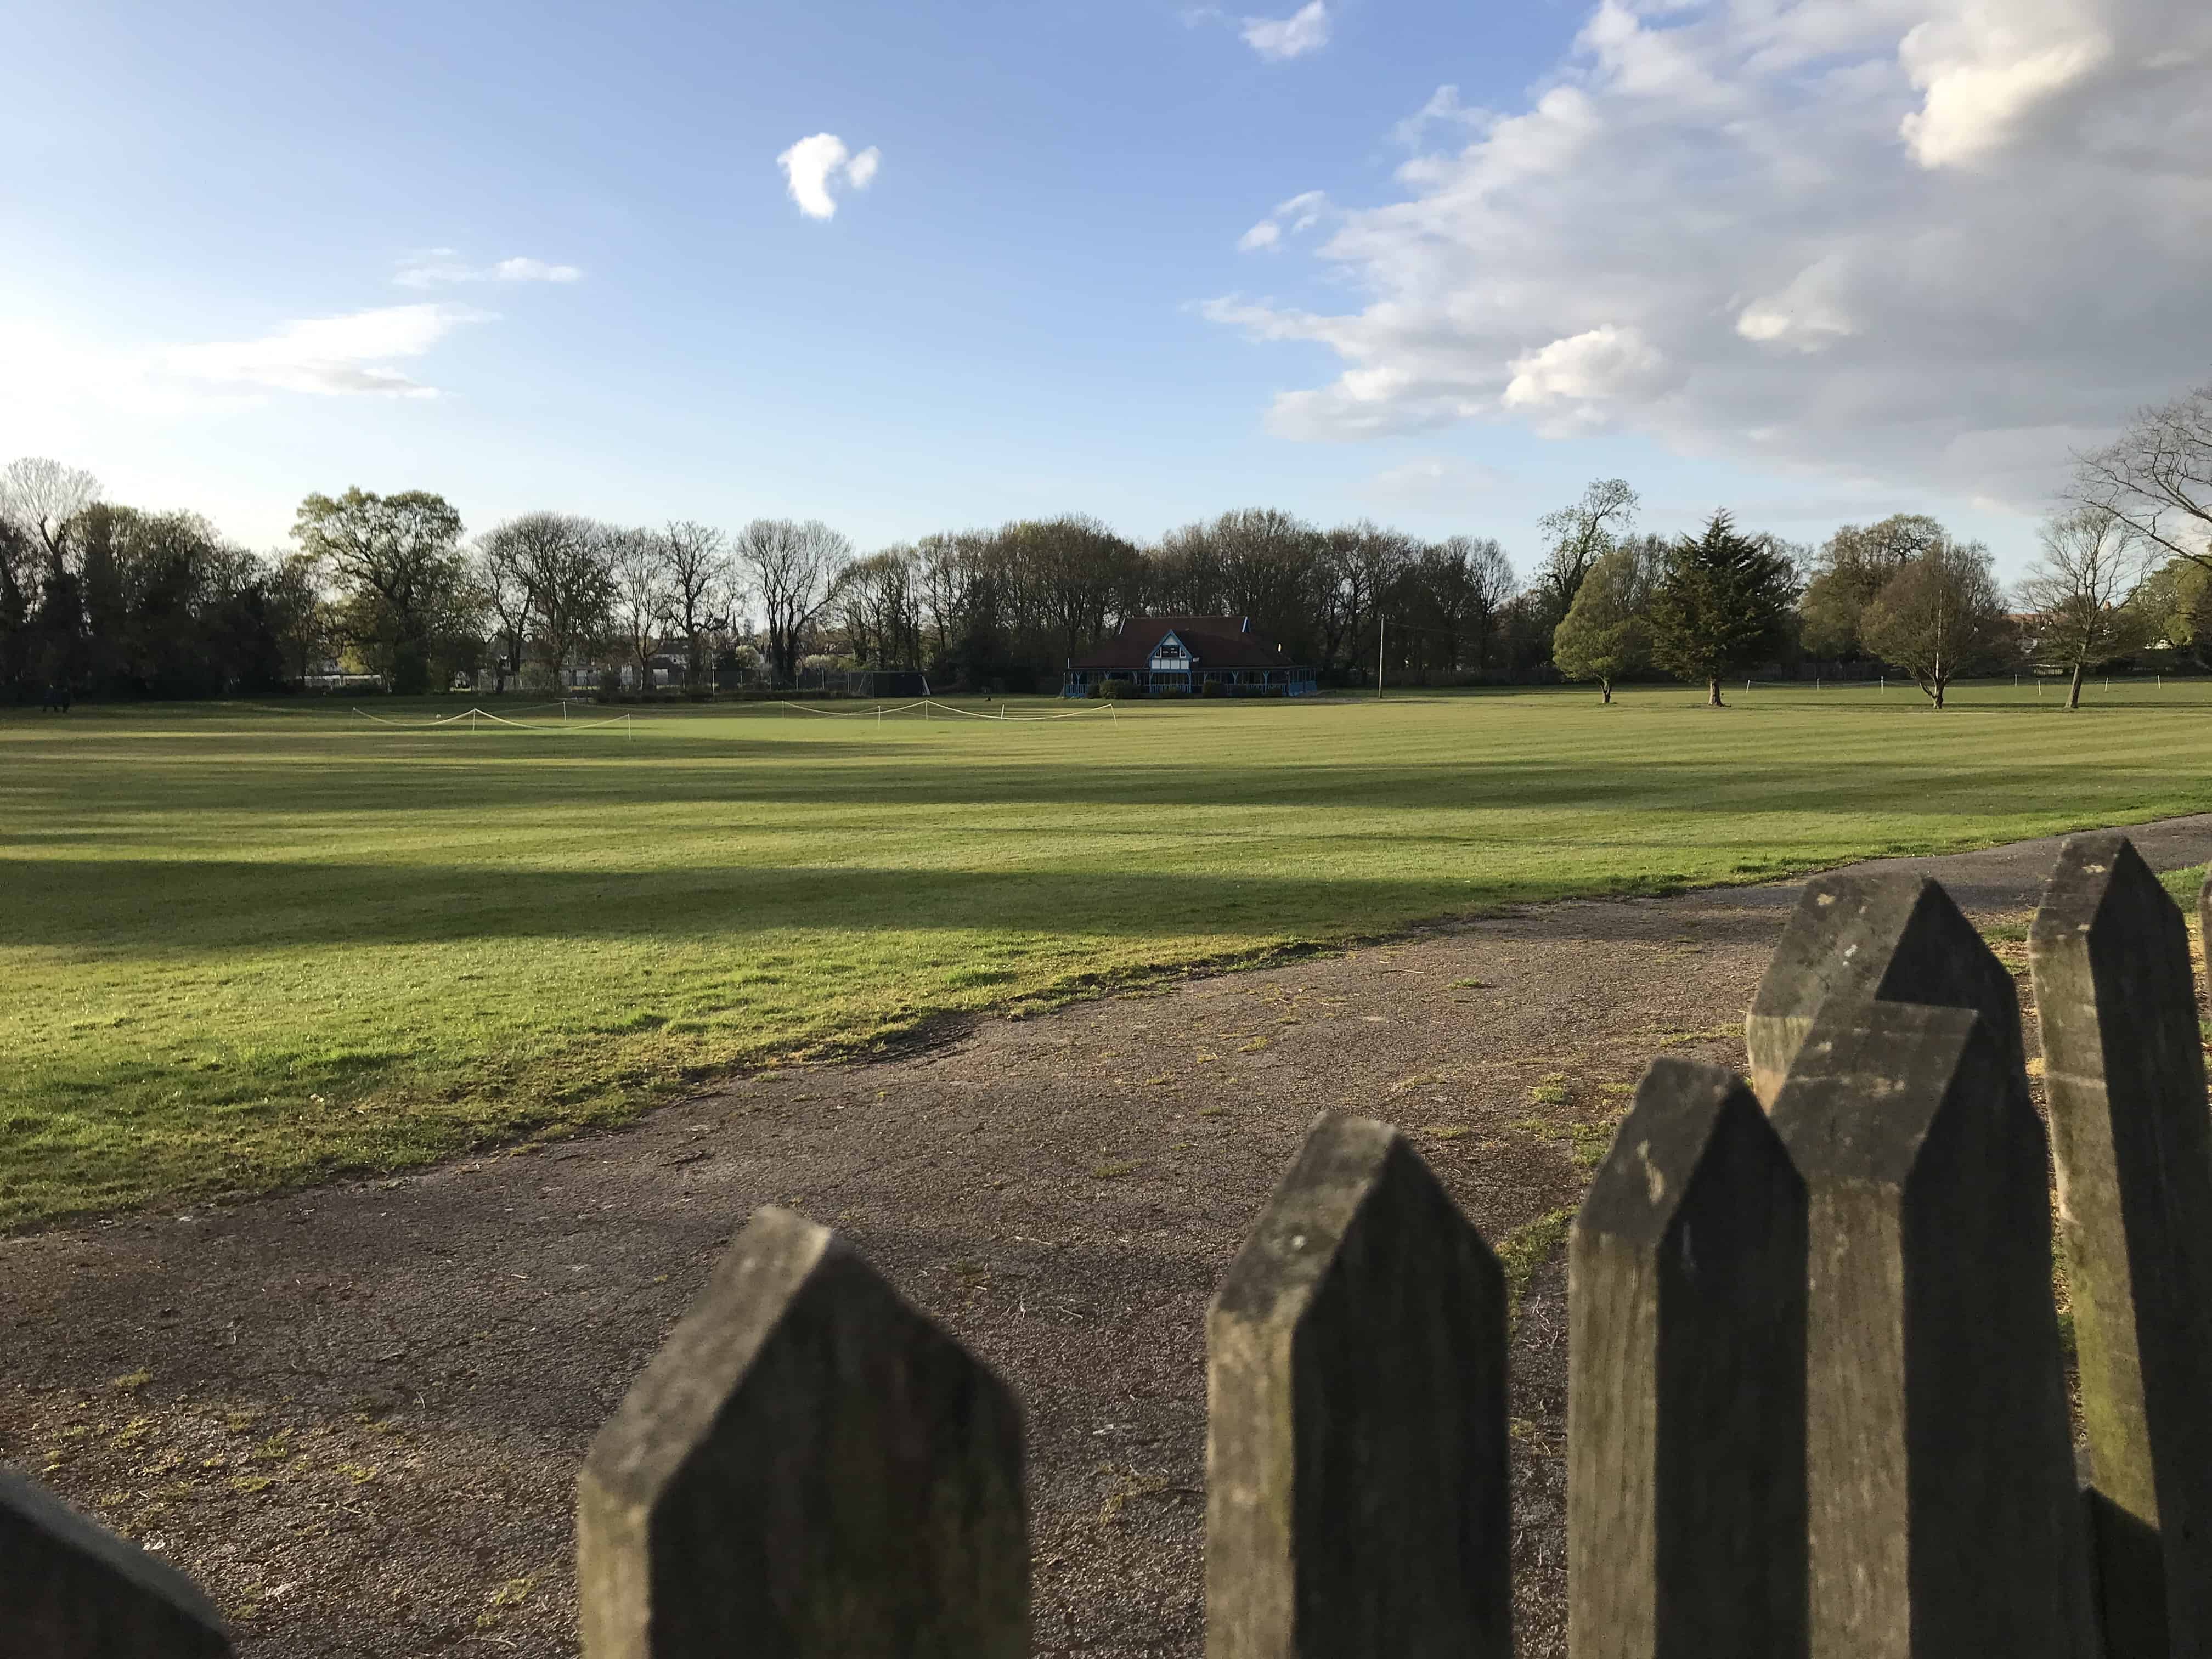 The view of Gallery Road's playing fields on Monday, April 6, early evening